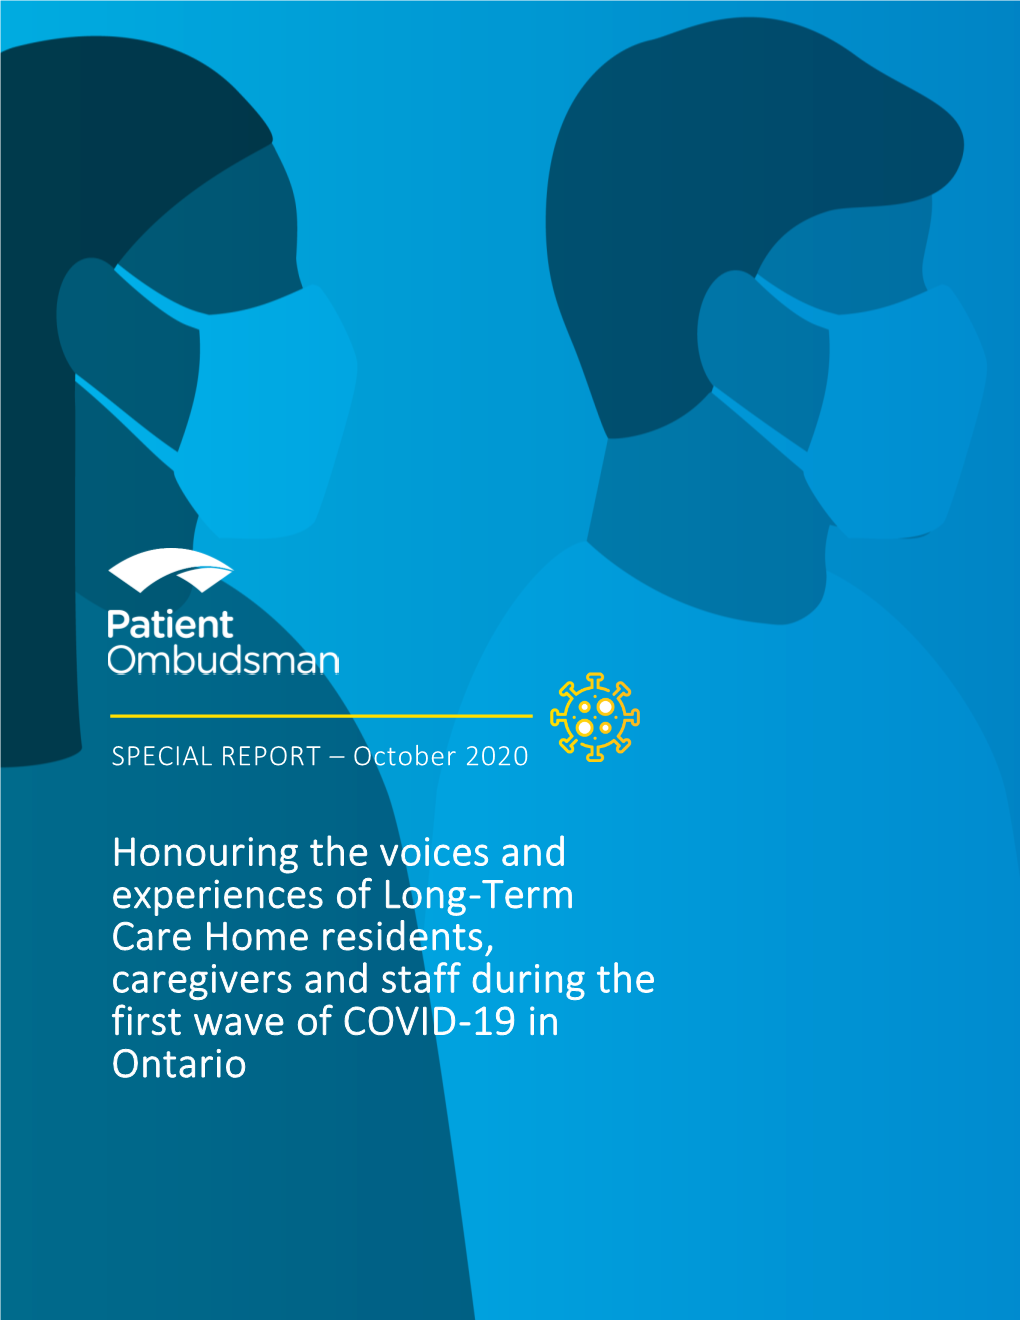 Honouring the Voices and Experiences of Long-Term Care Home Residents, Caregivers and Staff During the First Wave of COVID-19 in Ontario